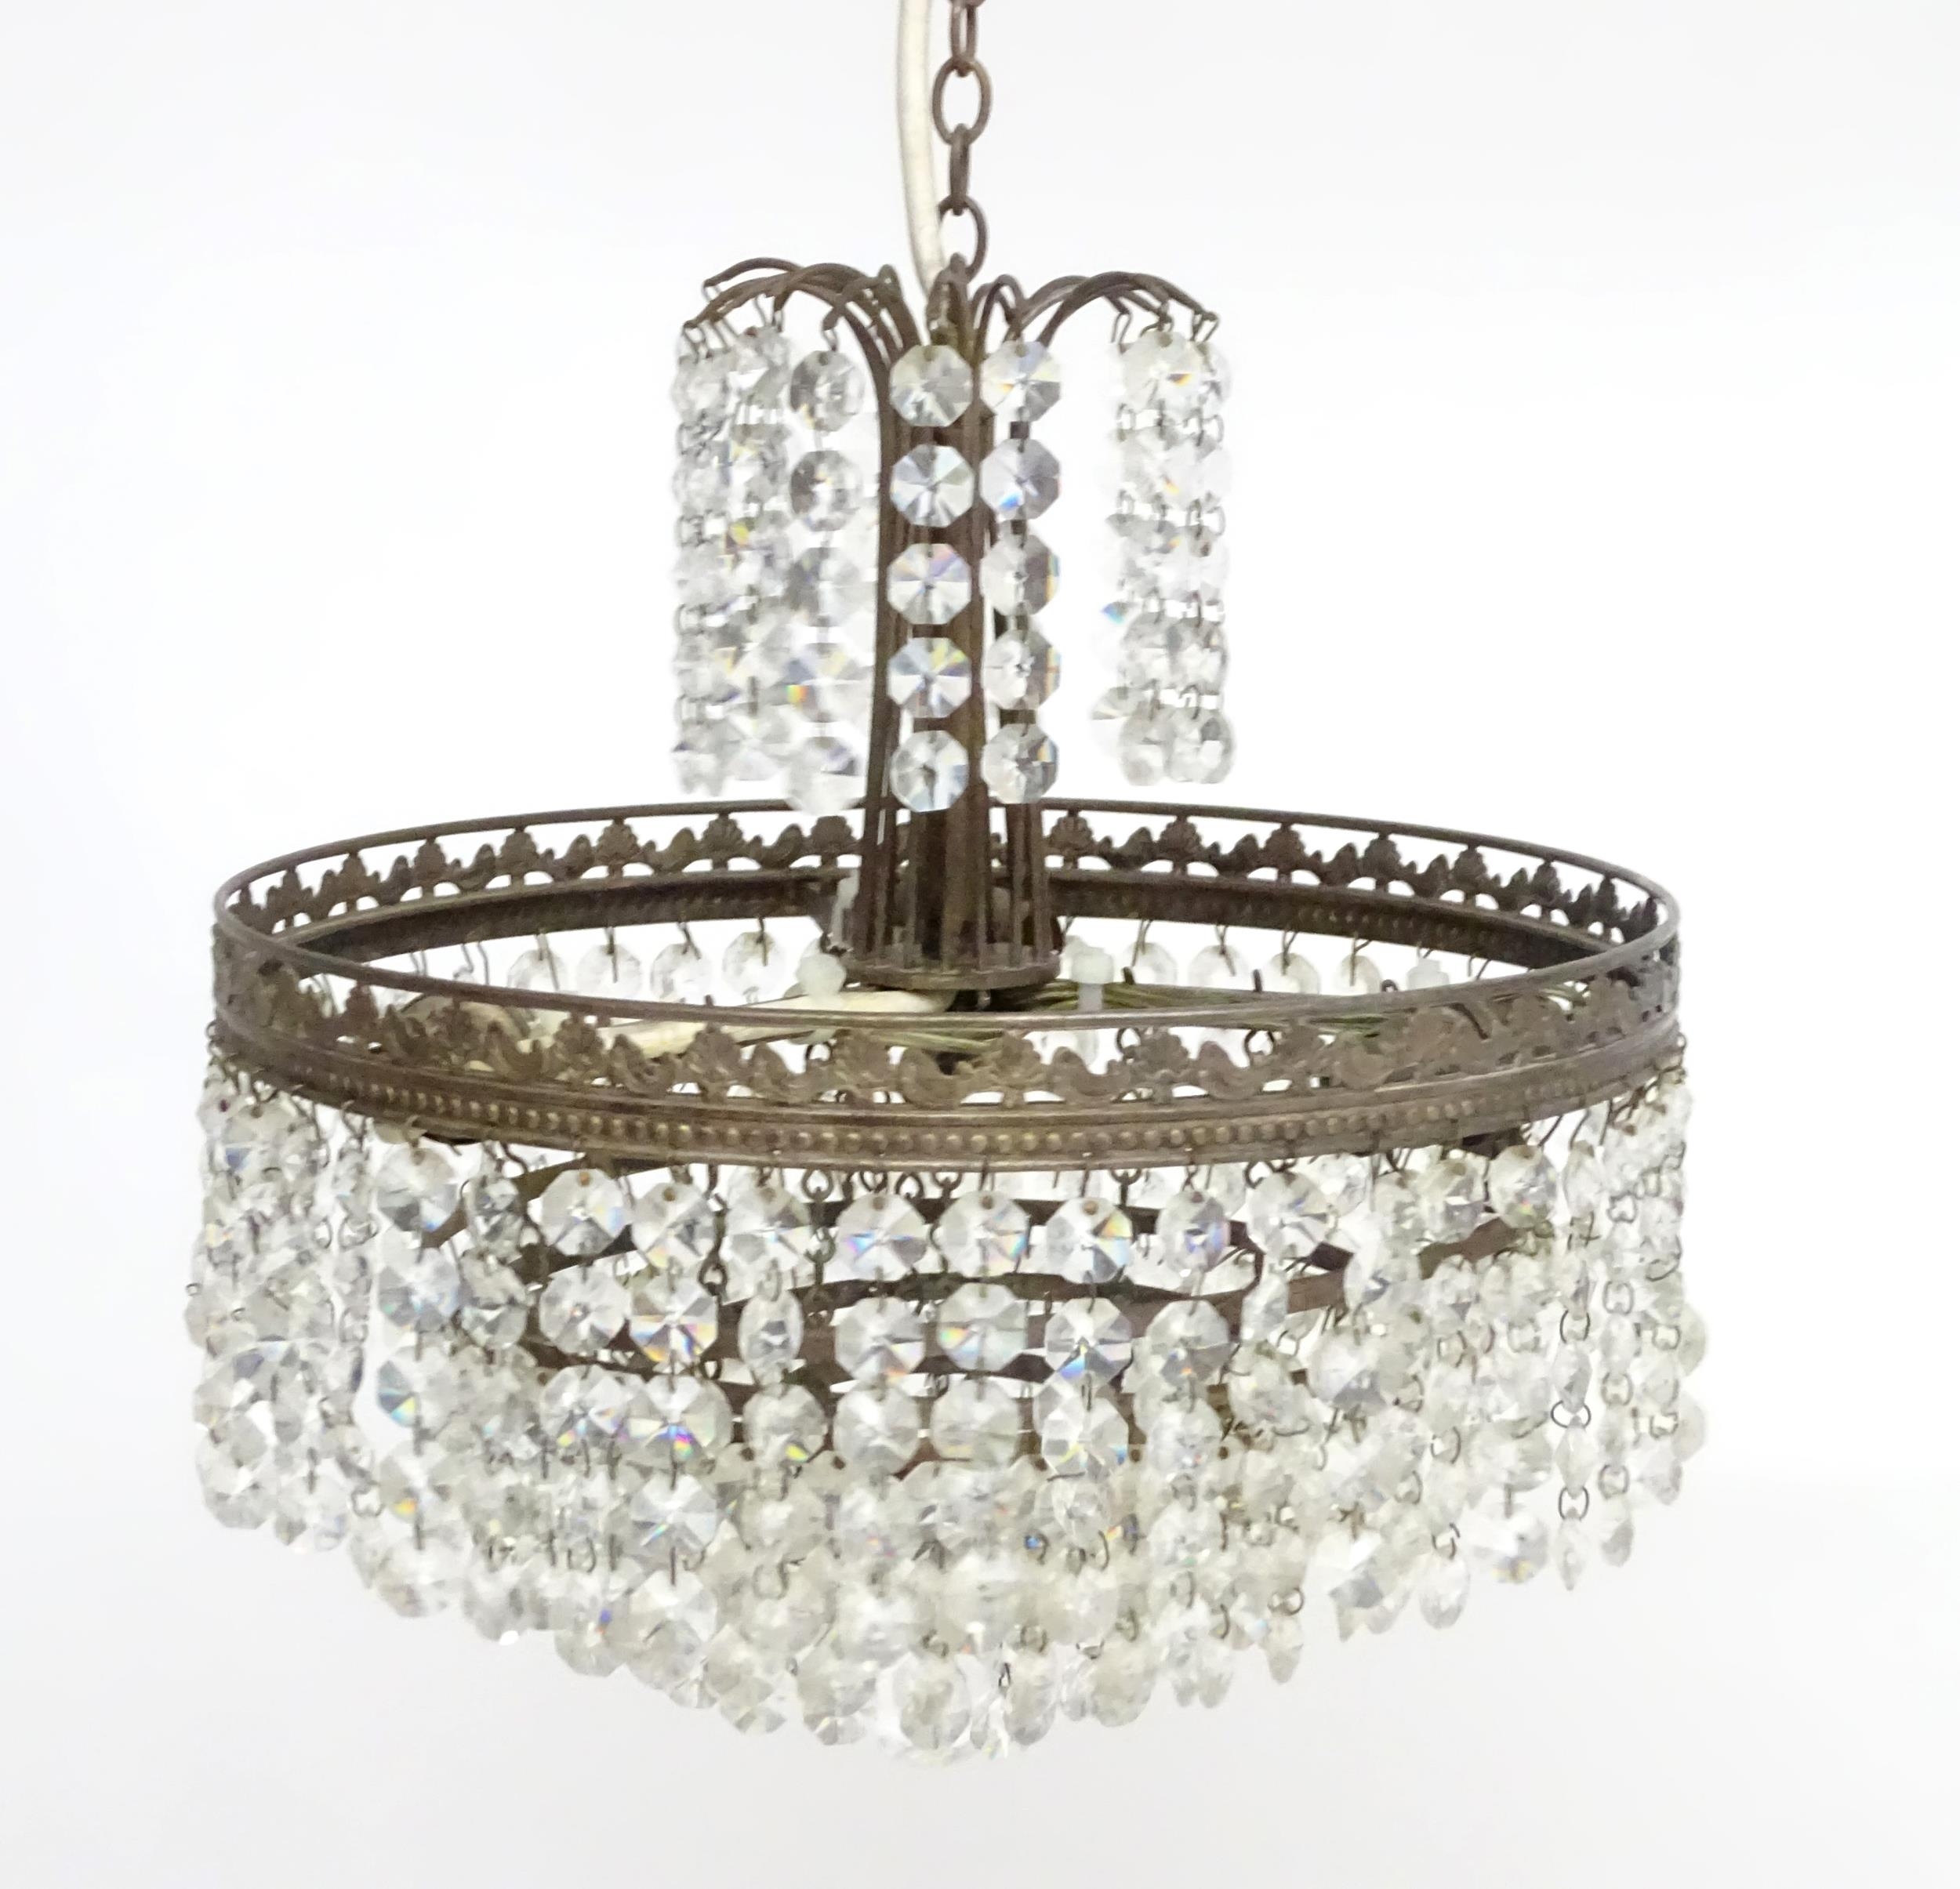 An early 20thC crystal drop bag pendant ceiling light, the chain supporting brass mounts with a - Image 8 of 8